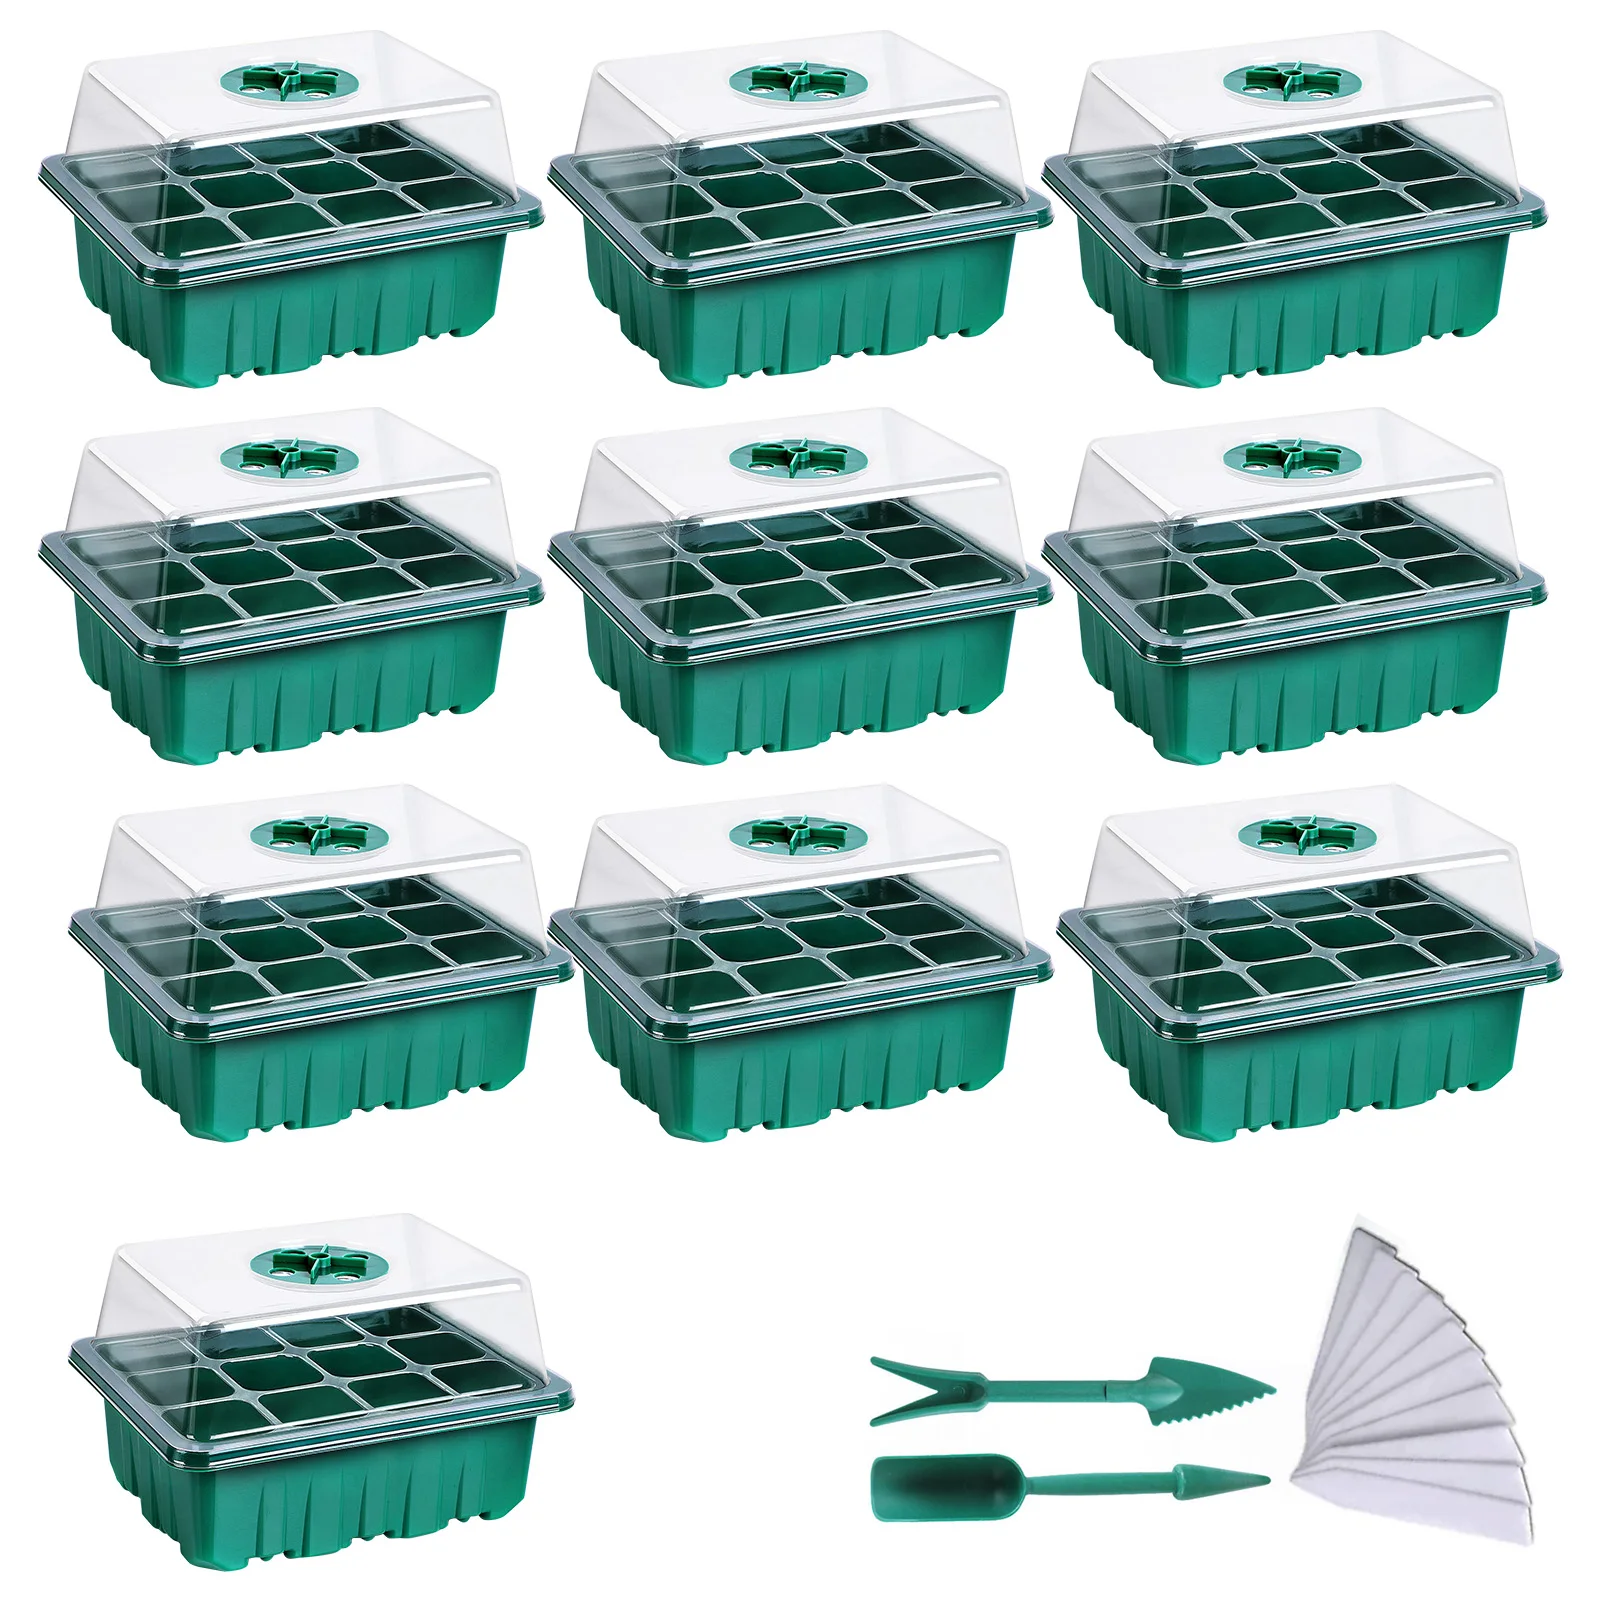 

10 Pack Plant Seed Starter Trays Kit 12 Holes Reusable Seedling Planting Growing Tray with Drain Hole for Greenhouse Germination